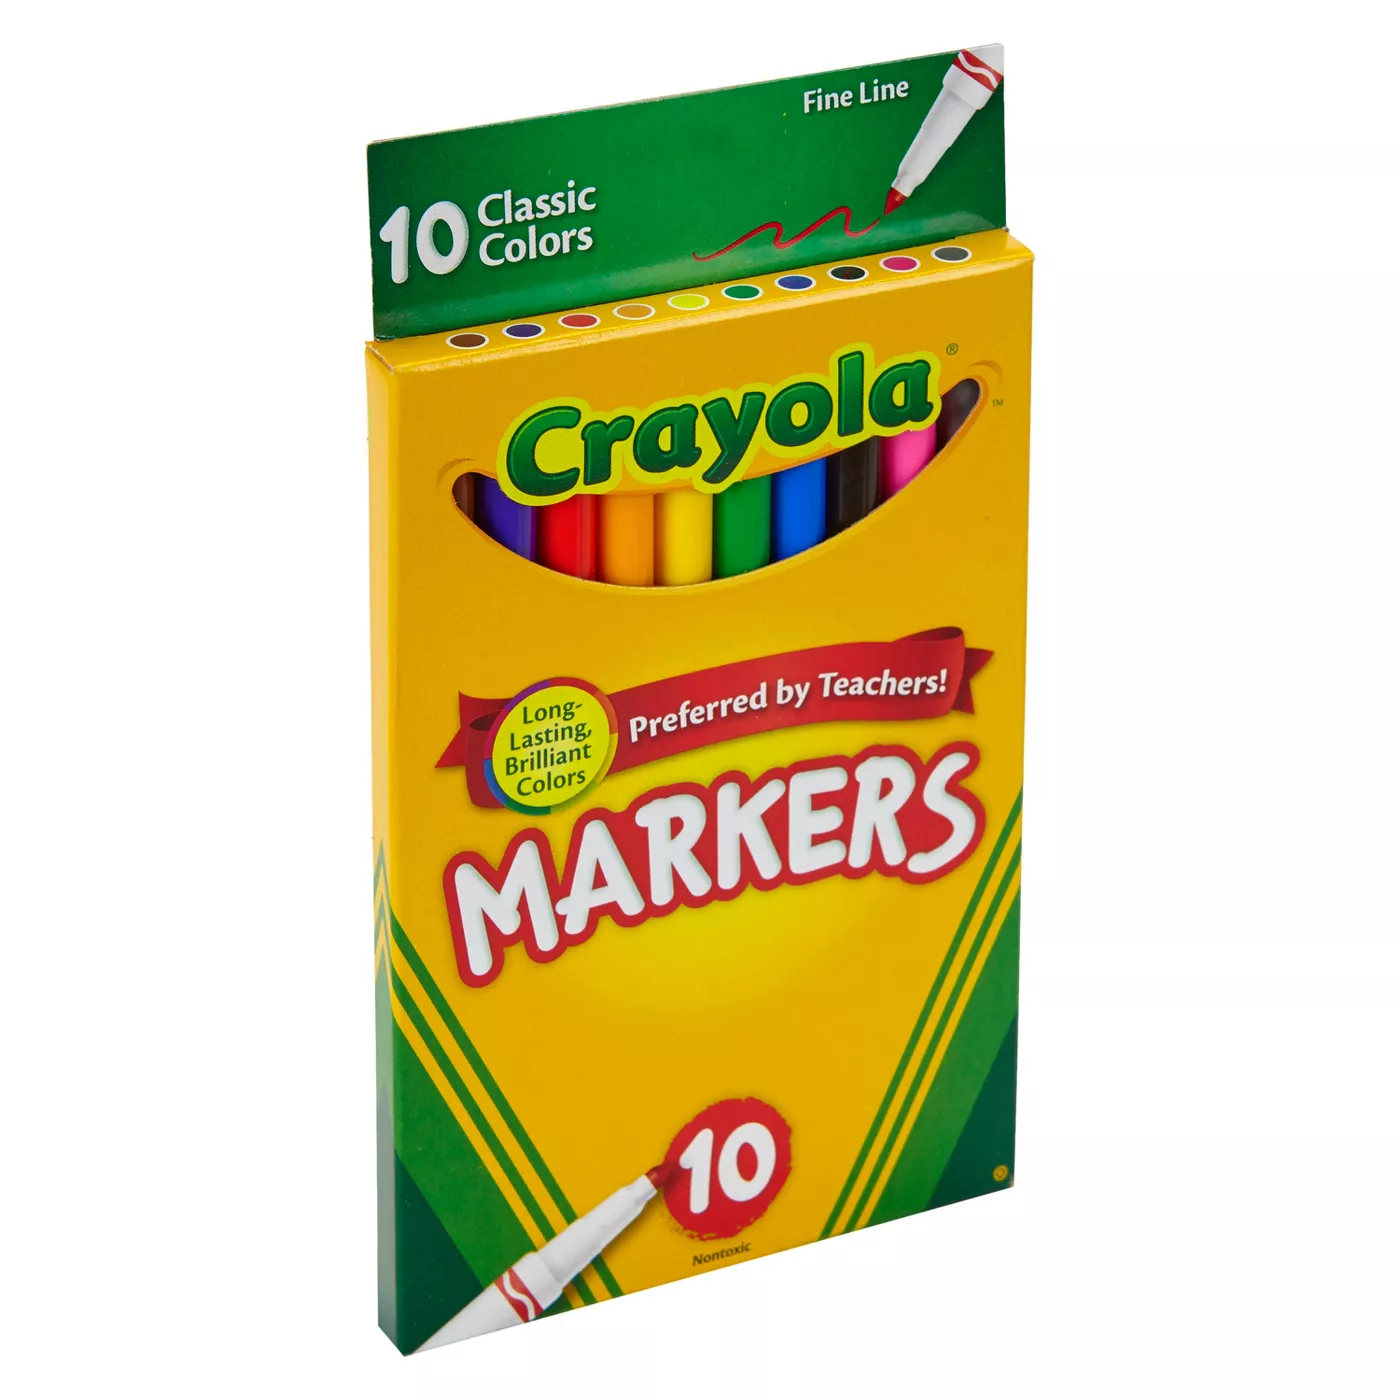 Crayola 10ct Fine Line Markers Classic Colors - image 2 of 3